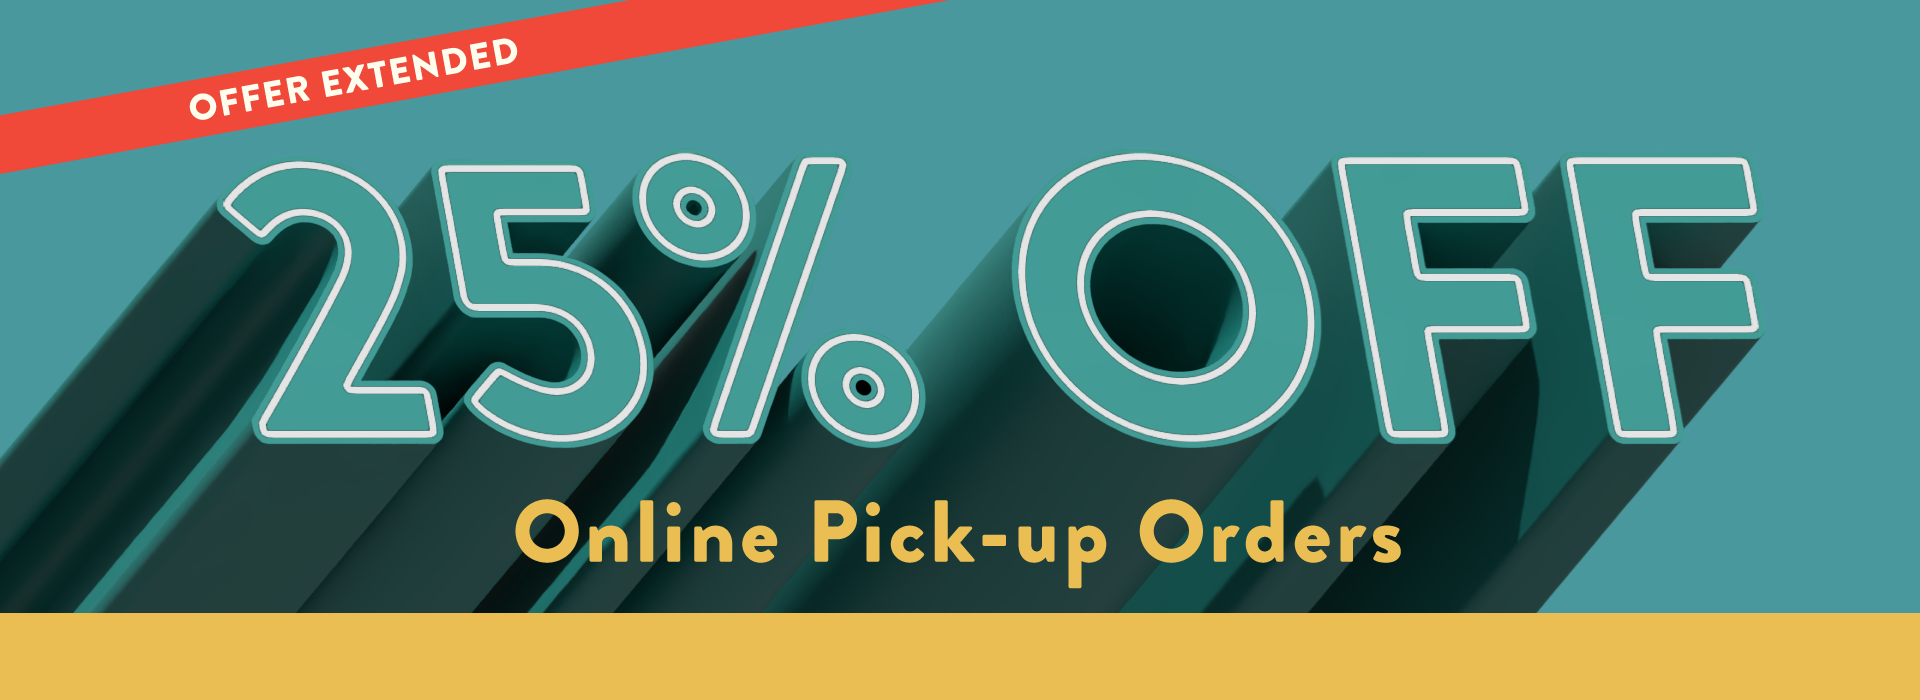 25% Off Online Pick-Up Orders – UNTIL JANUARY 31ST